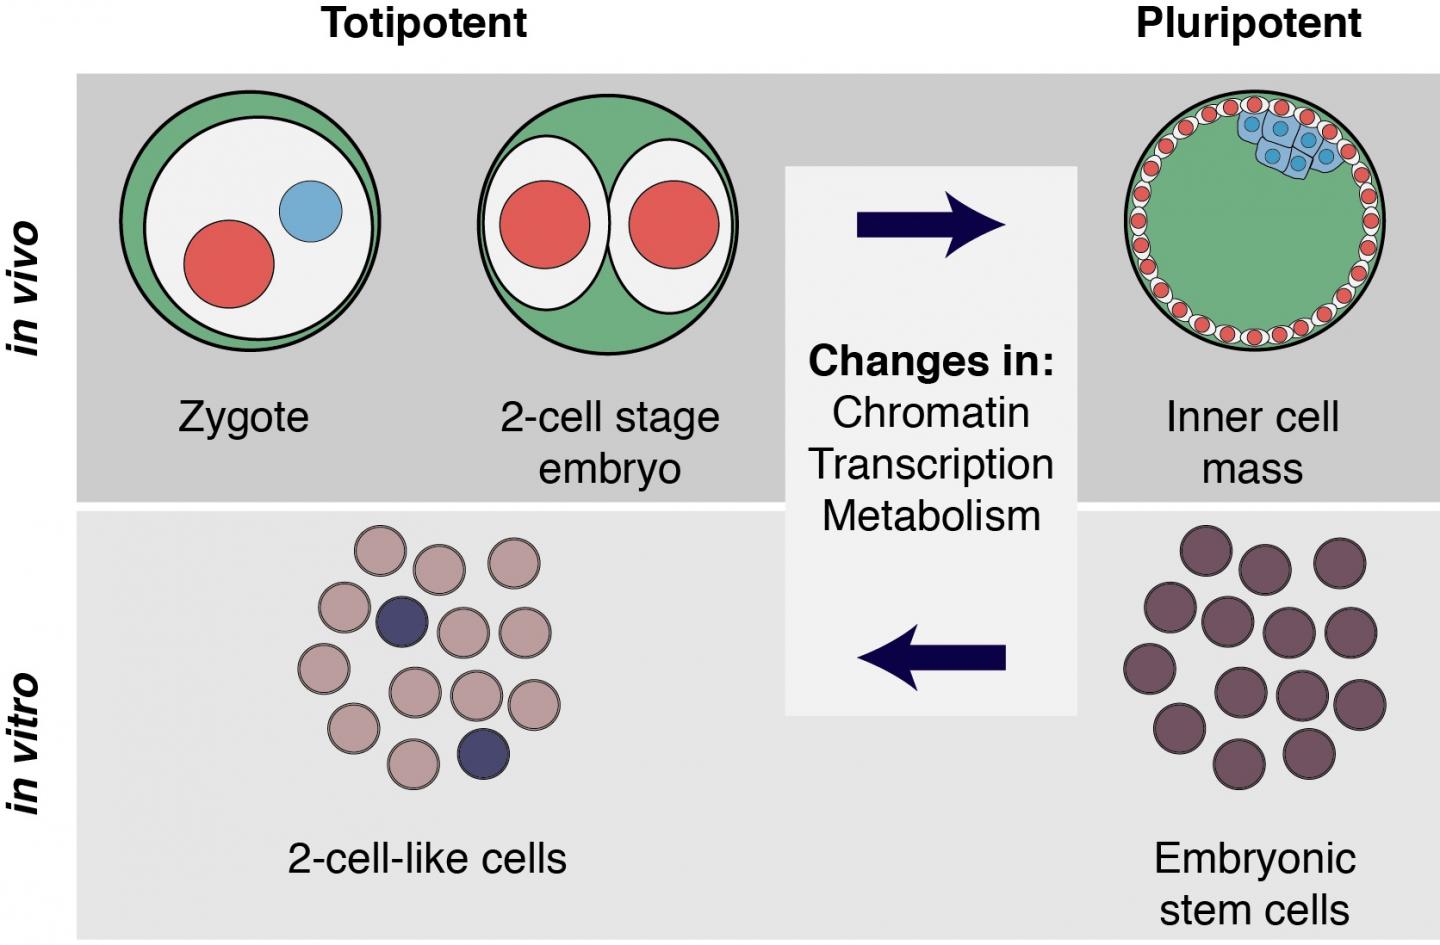 Cell Fate Reprogramming Is Accompanied by Many Molecular Changes